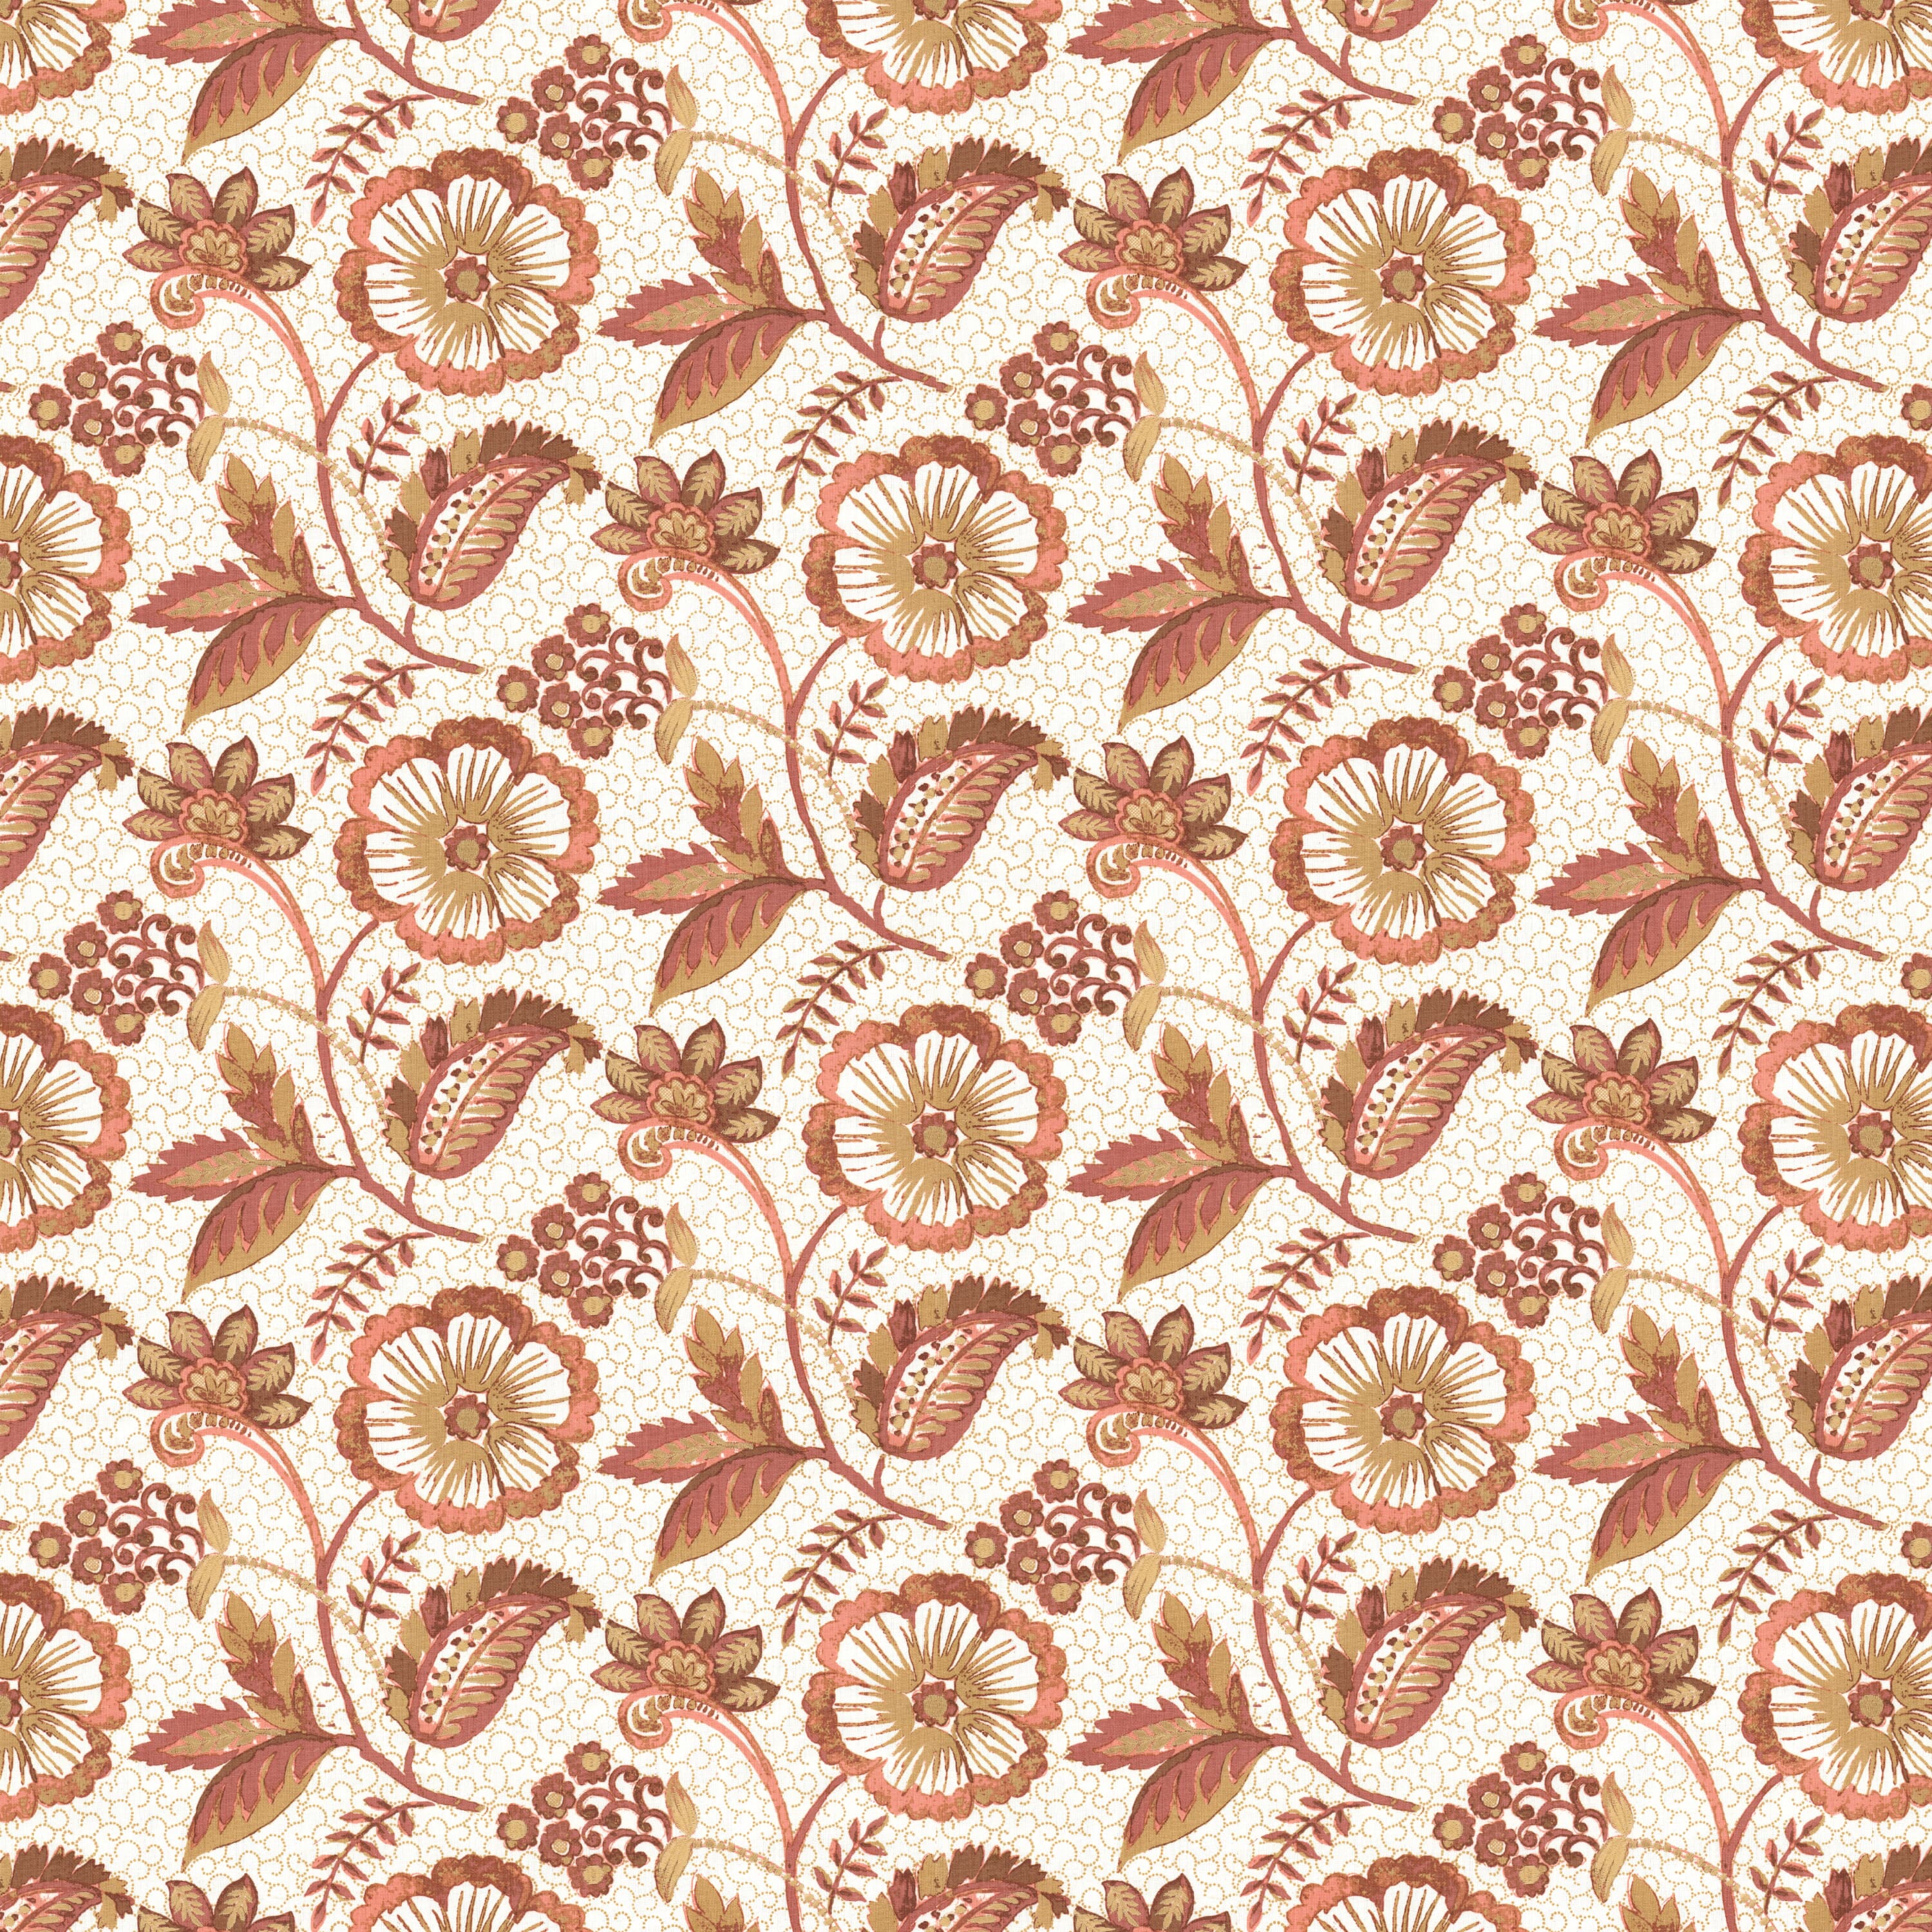 Jasmine 1 Russet by Stout Fabric